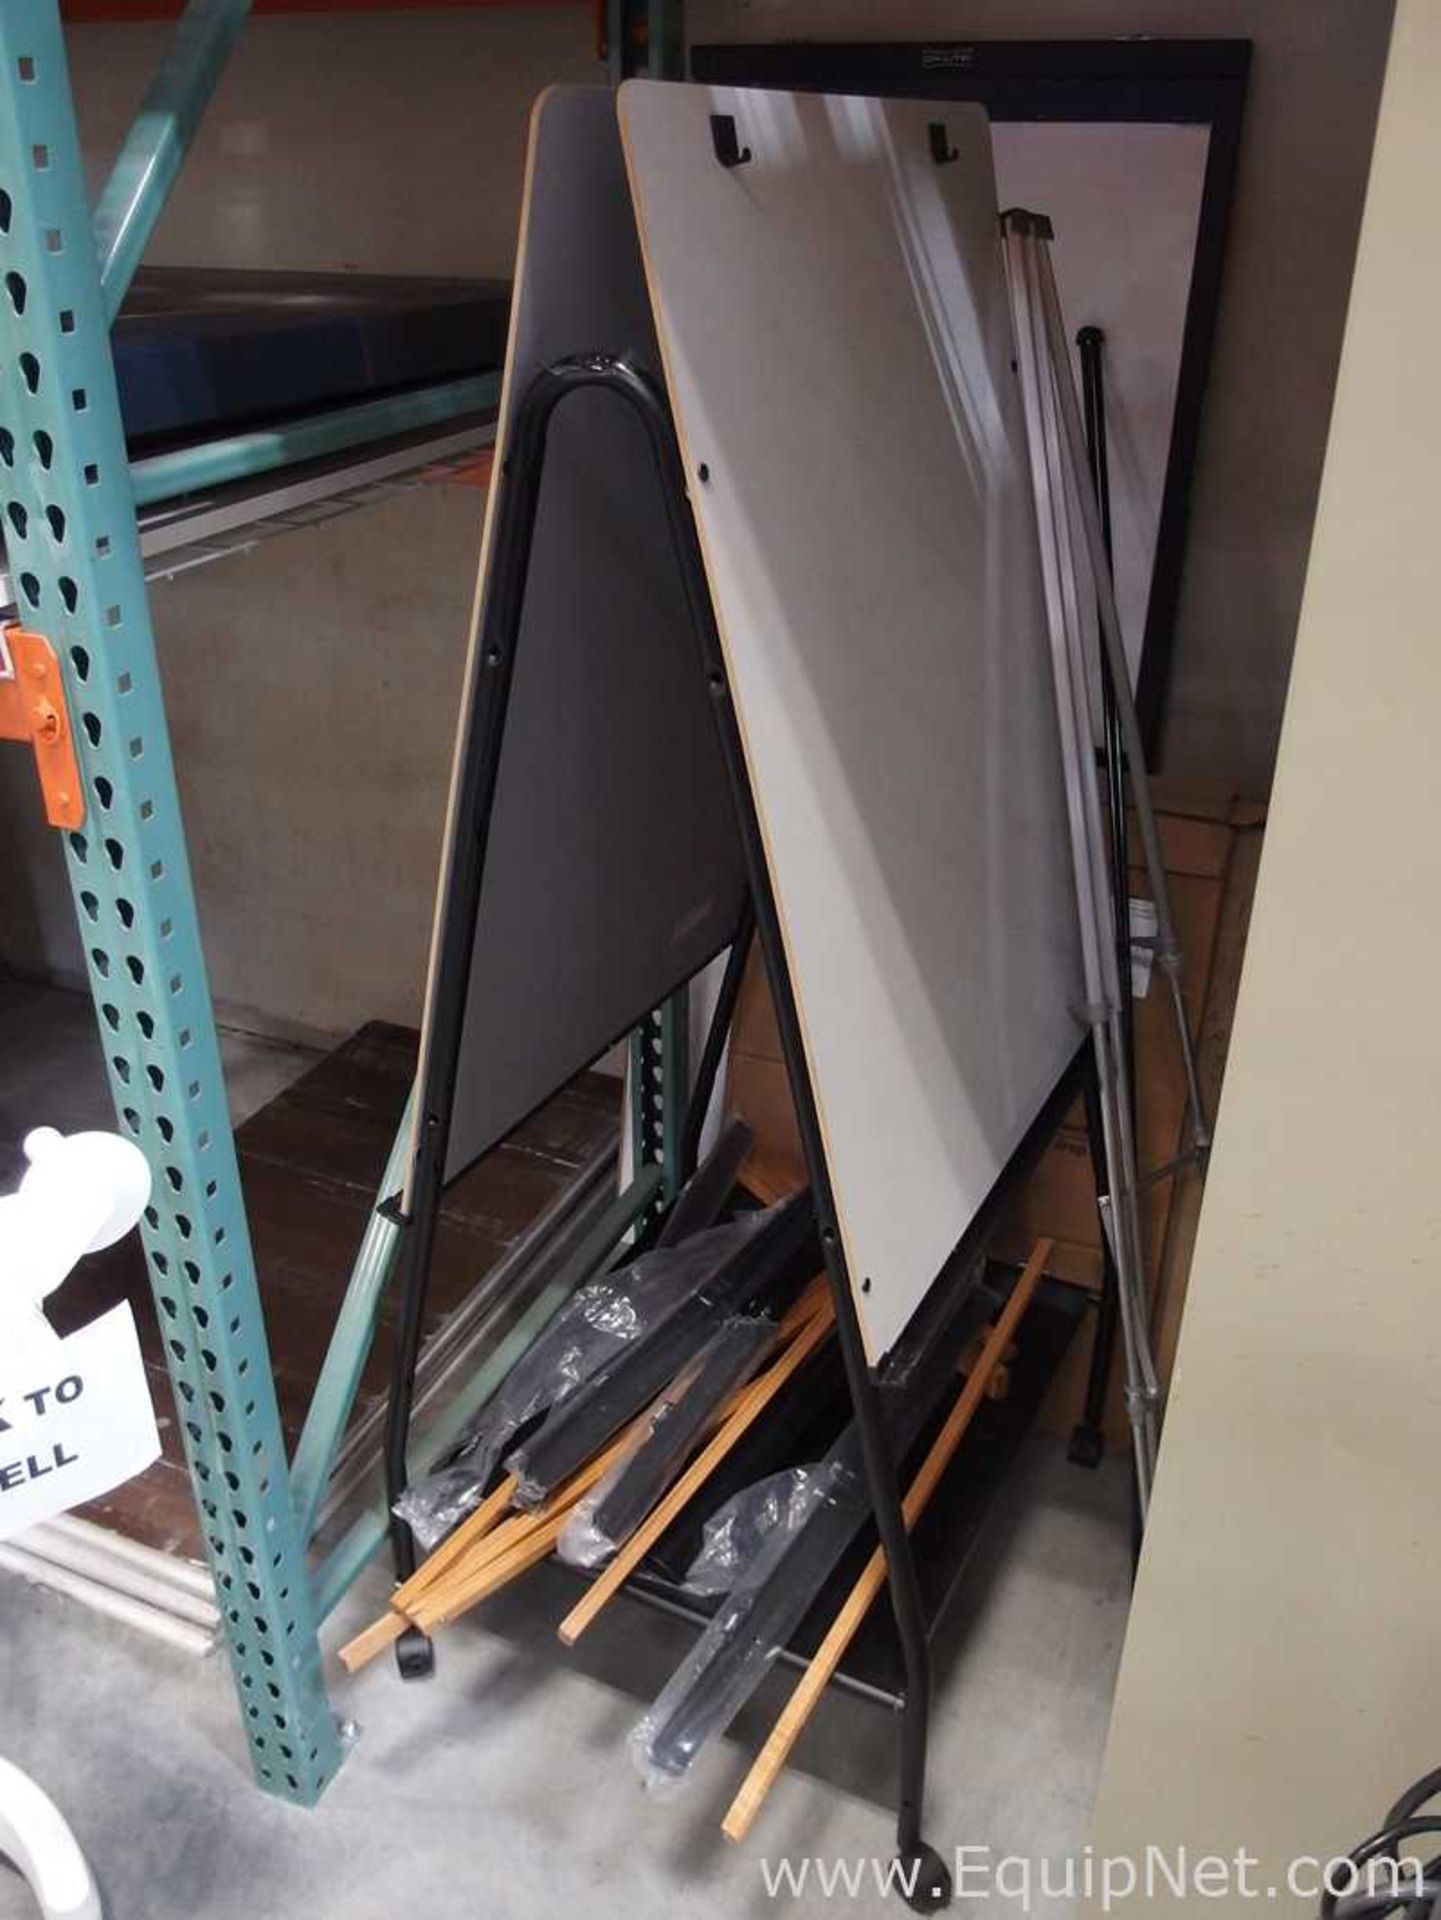 Lot of Assorted Whiteboards Easels and Cork Boards - Image 3 of 7